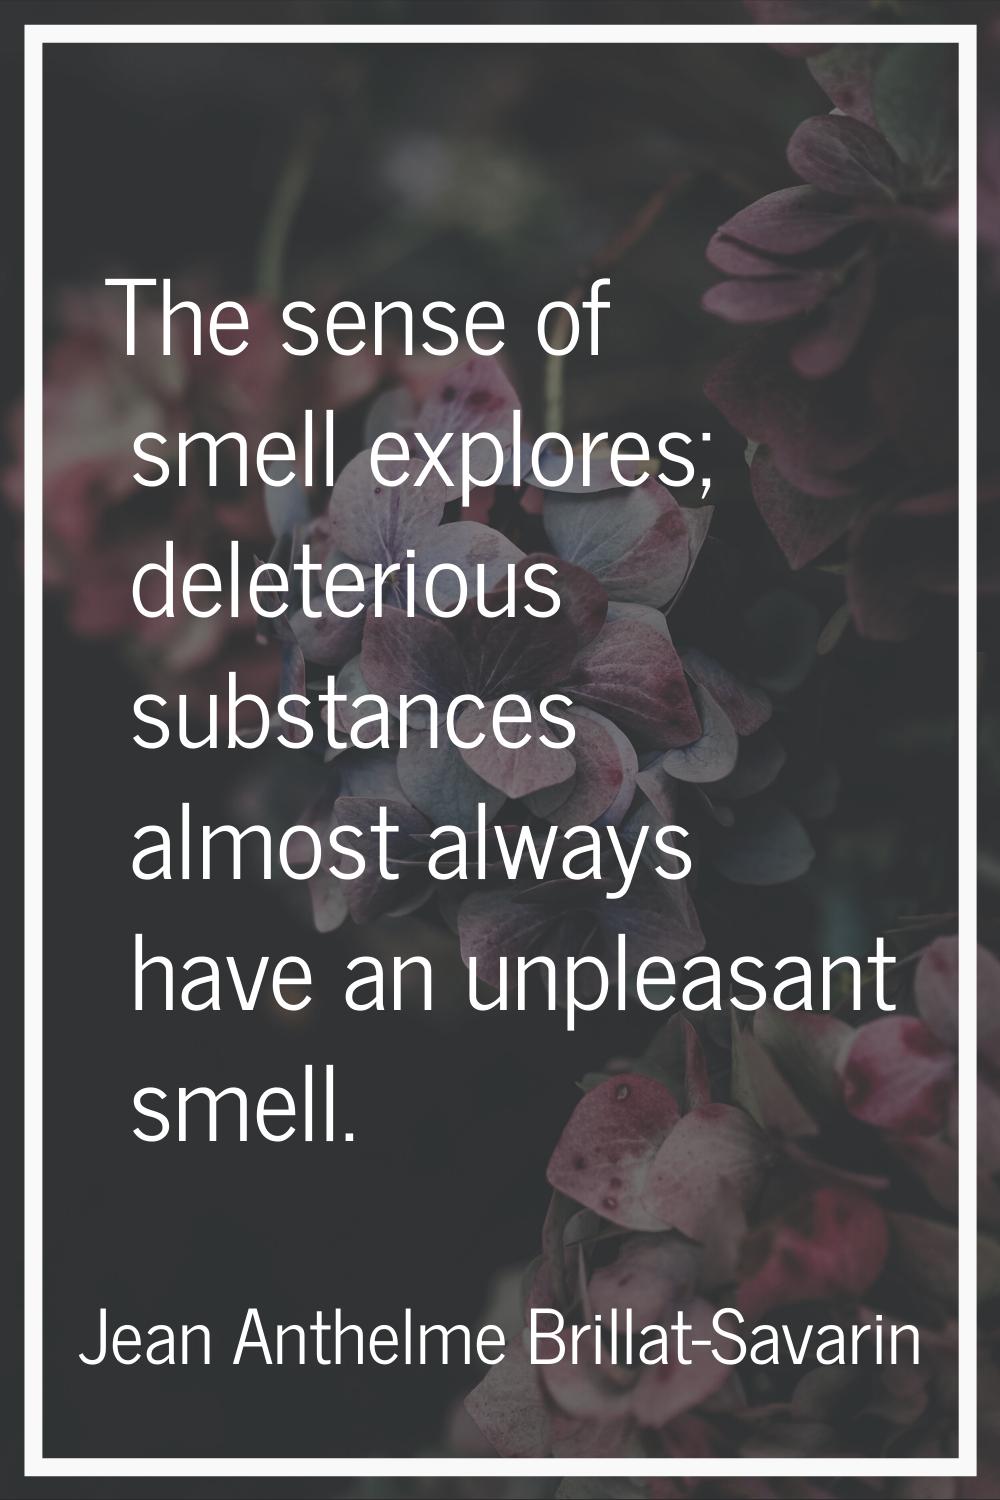 The sense of smell explores; deleterious substances almost always have an unpleasant smell.